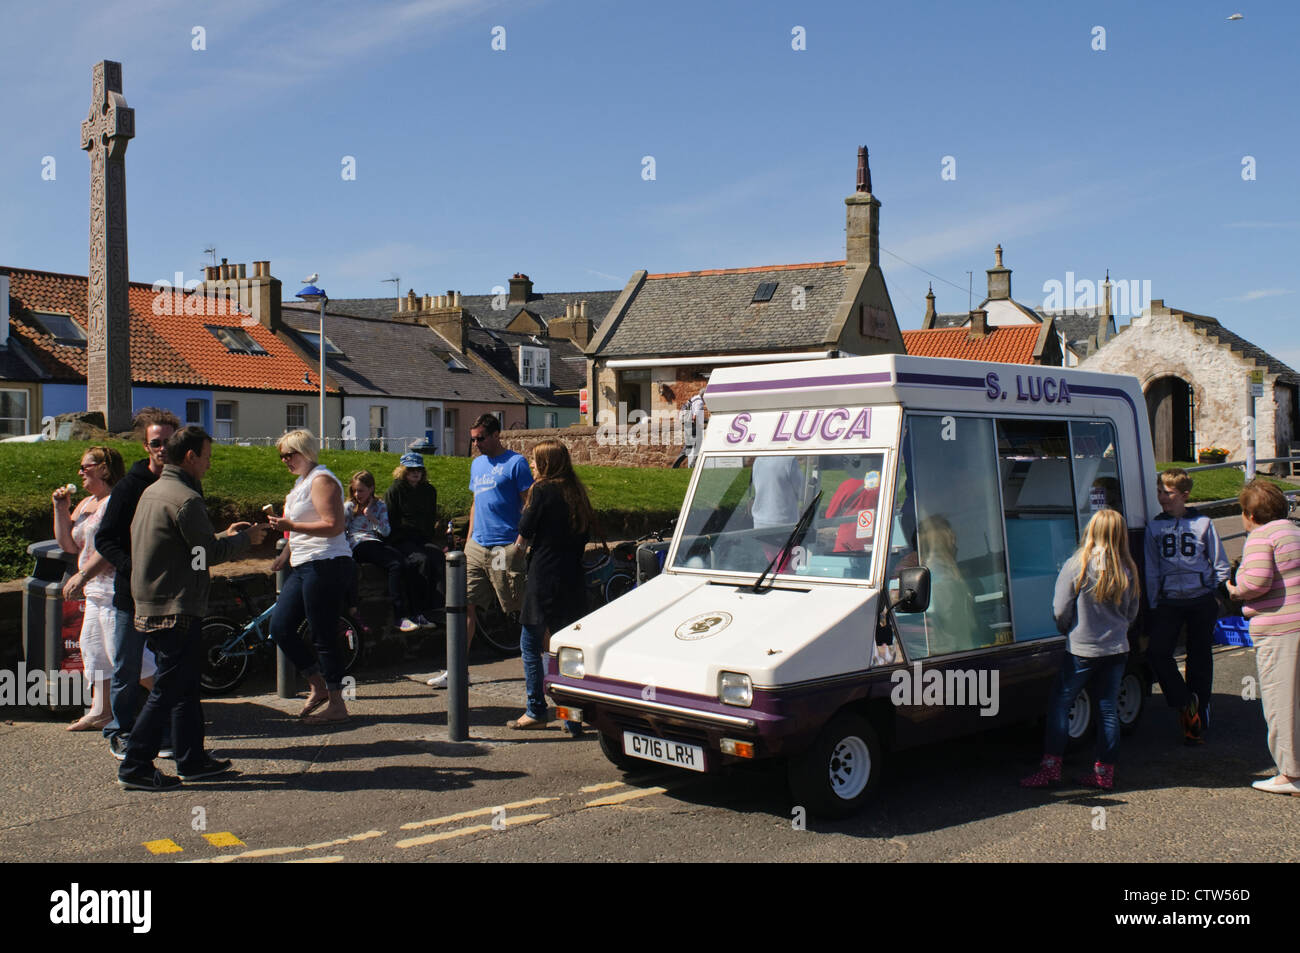 Scotland Ice Cream Van High Resolution Stock Photography and Images - Alamy